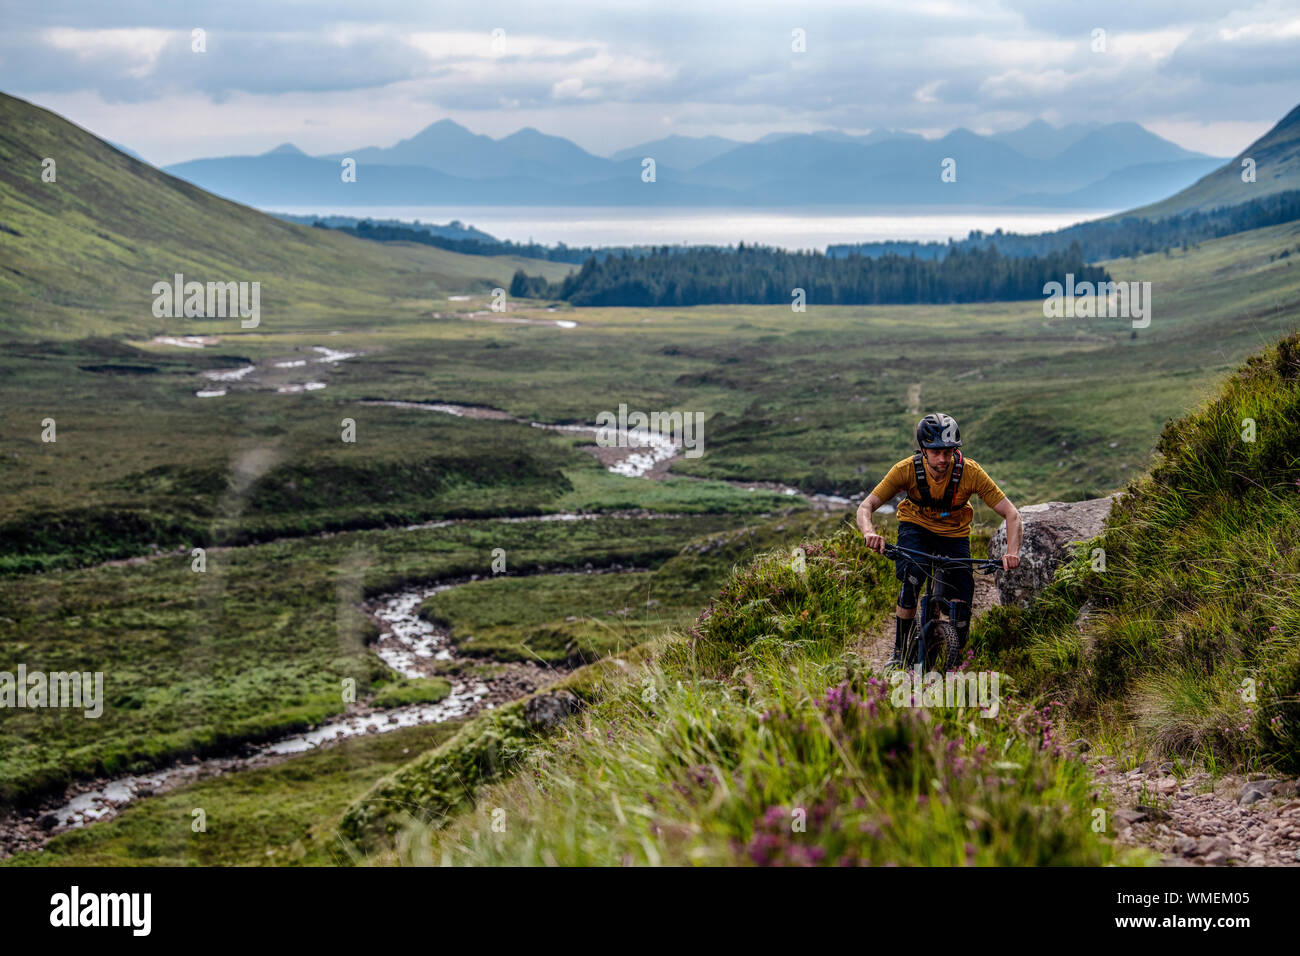 A man rides a mountain bike on a trail on the Applecross Peninsula in the north west Highlands of Scotland in the summer. Stock Photo